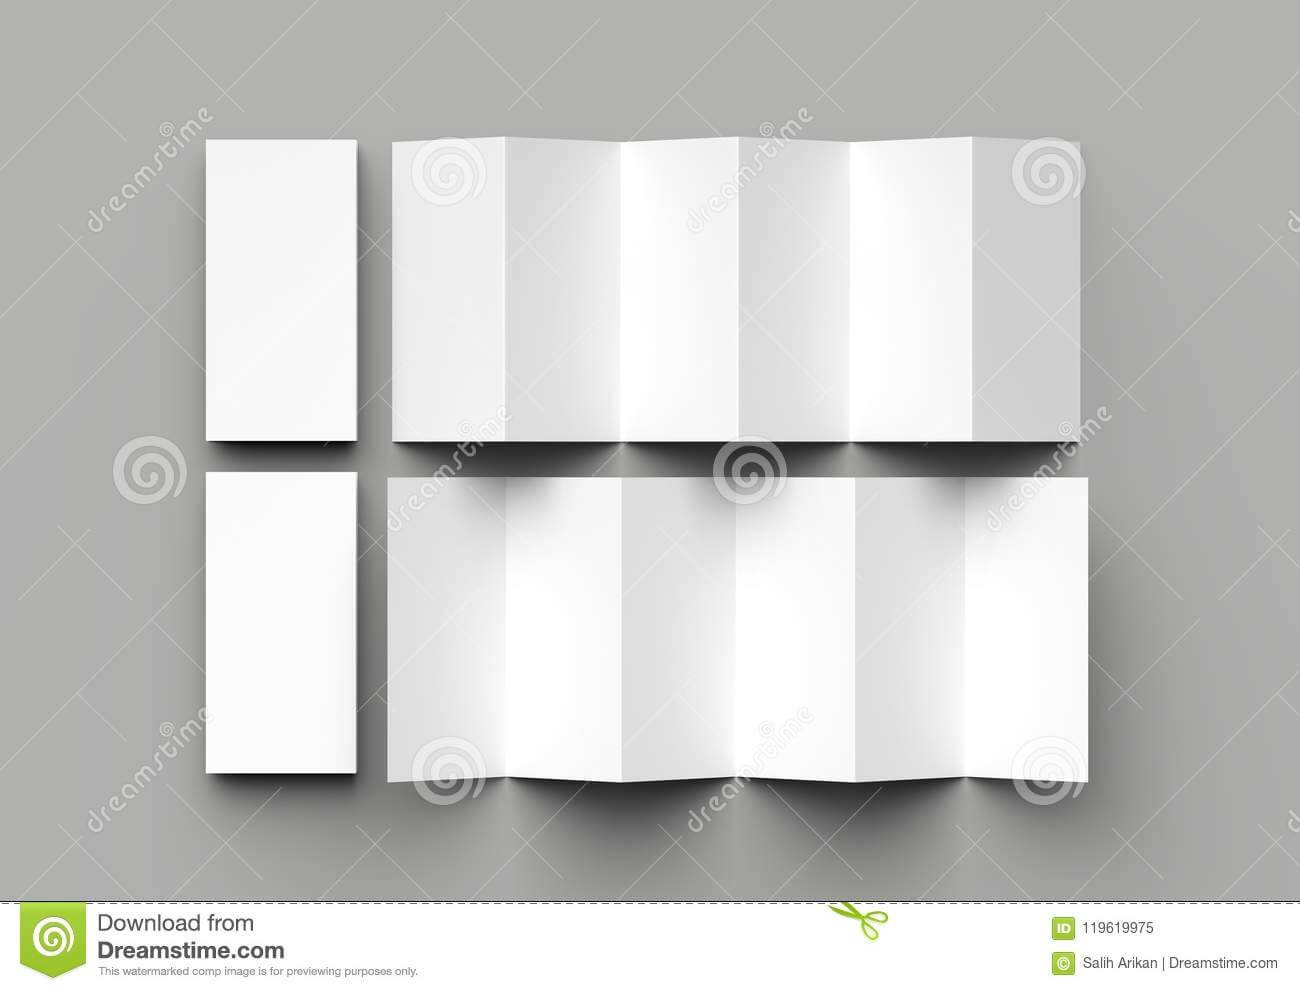 12 Page Leaflet, 6 Panel Accordion Fold - Z Fold Vertical Pertaining To 12 Page Brochure Template